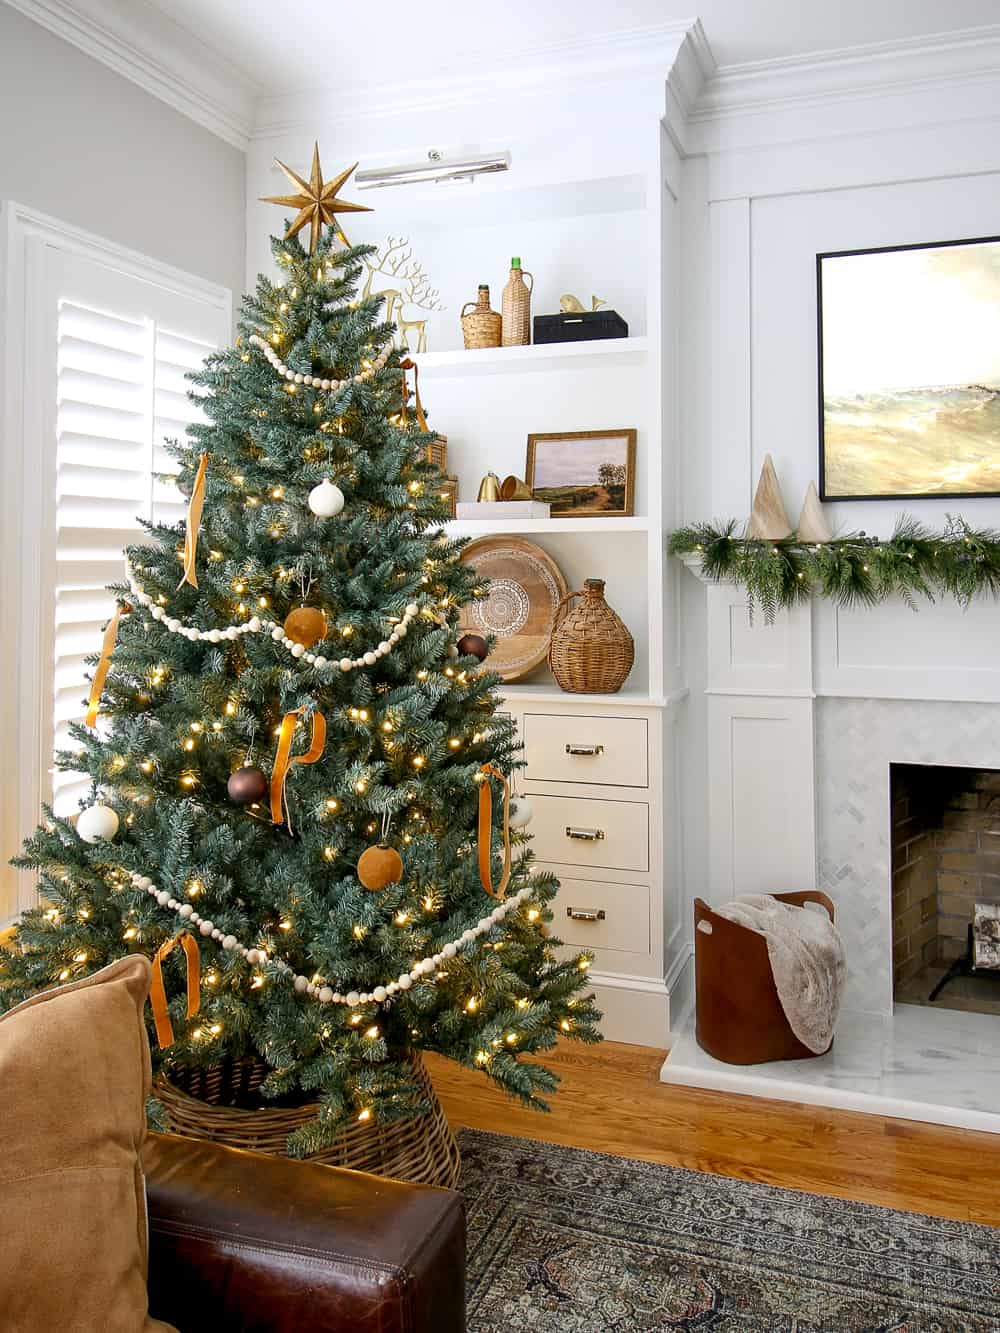 Full artificial blue spruce in living room decorated with neutral ornaments, wood bead garland and a gold star topper, frame tv over fireplace mantel decorated for Christmas with garland and wooden trees, shelf decor in background with woven elements and vintage art